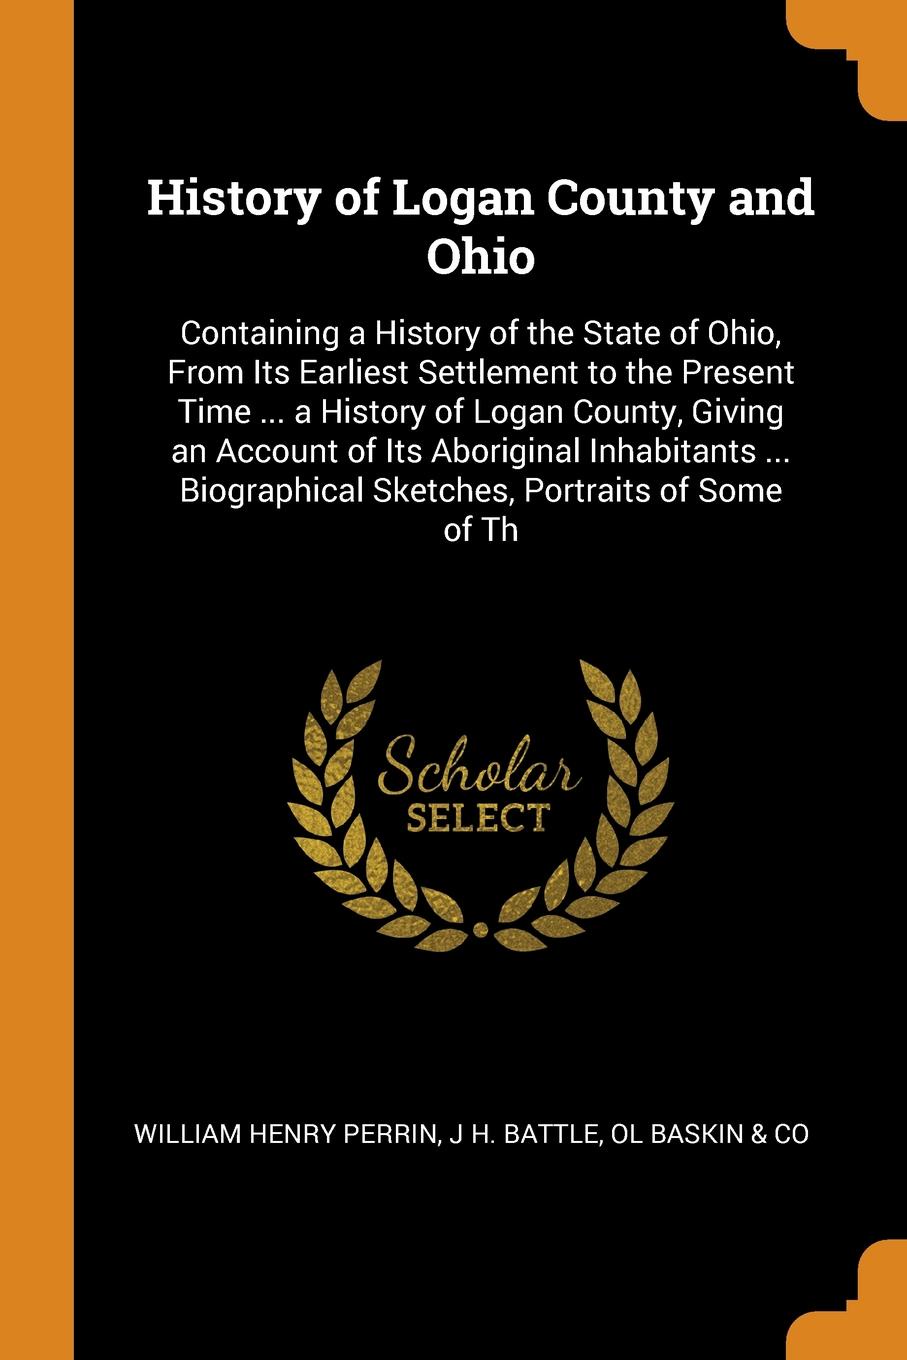 History of Logan County and Ohio. Containing a History of the State of Ohio, From Its Earliest Settlement to the Present Time ... a History of Logan County, Giving an Account of Its Aboriginal Inhabitants ... Biographical Sketches, Portraits of So...